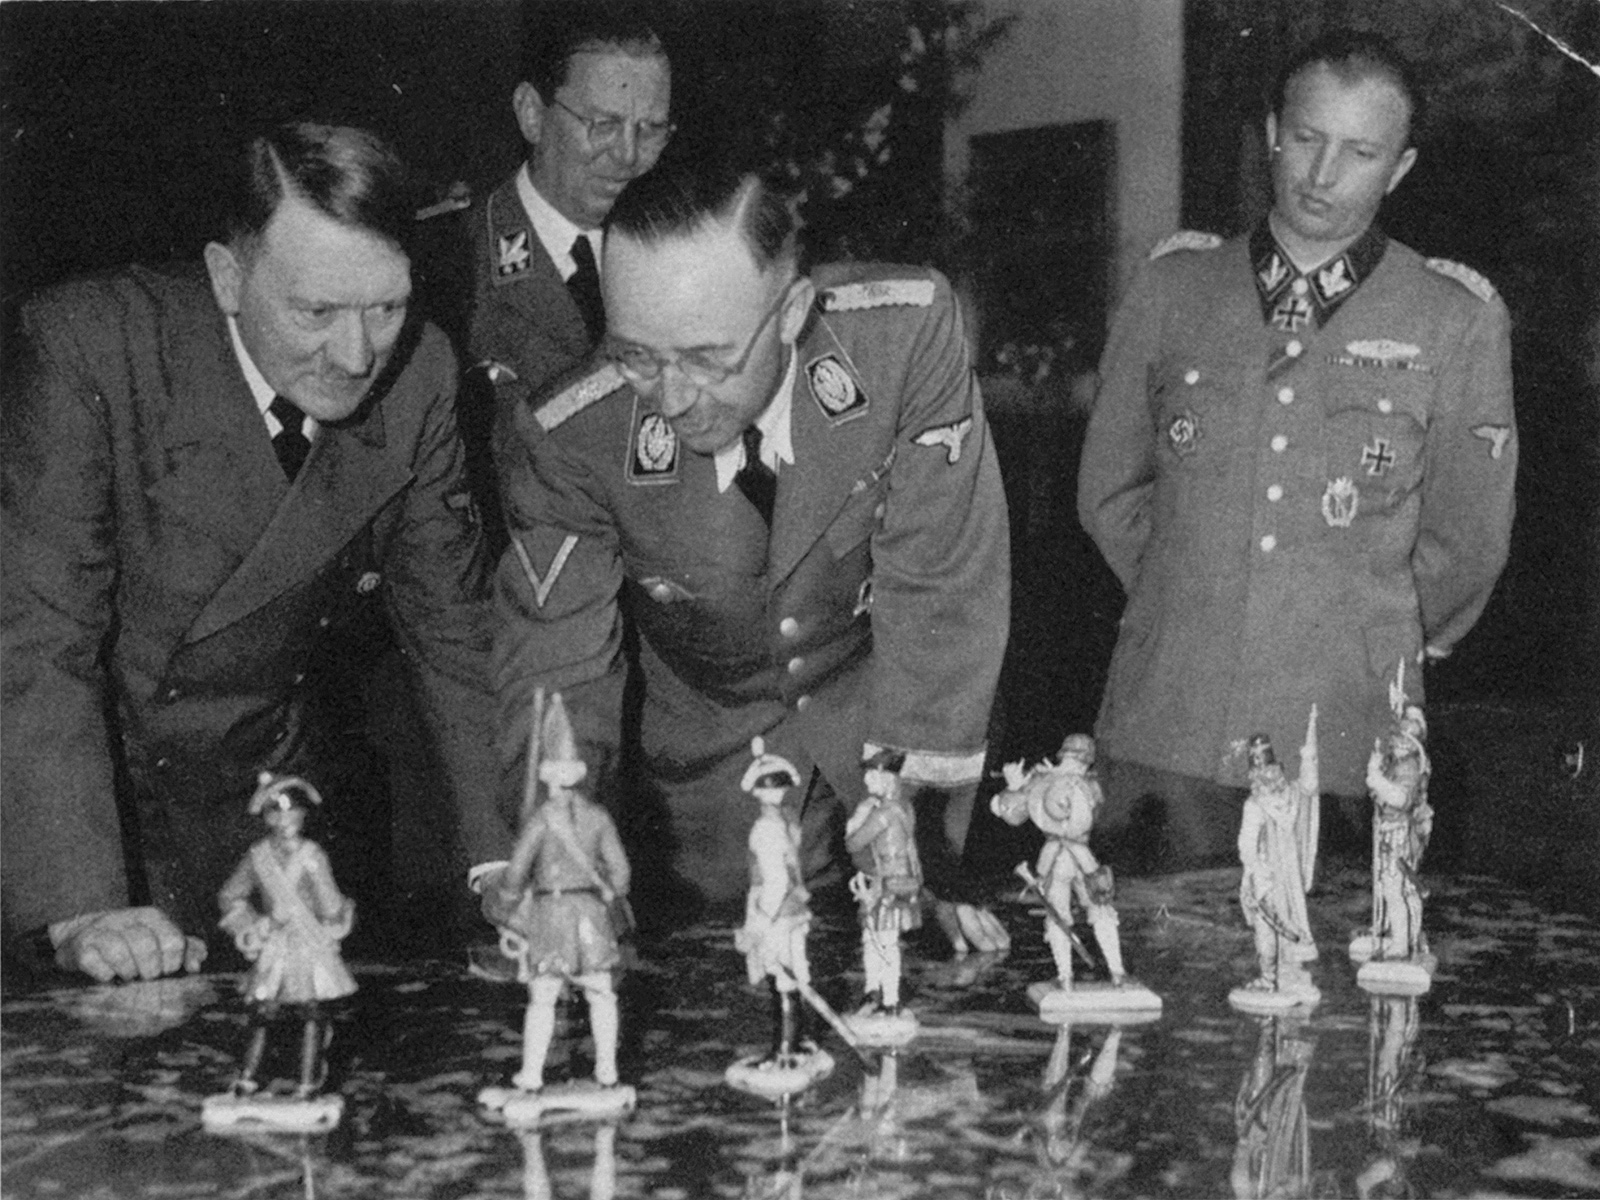 Heinrich Himmler’s birthday gifts to Adolf Hitler of porcelain figurines made under the Nazis, Berlin, April 1944; from The White Road